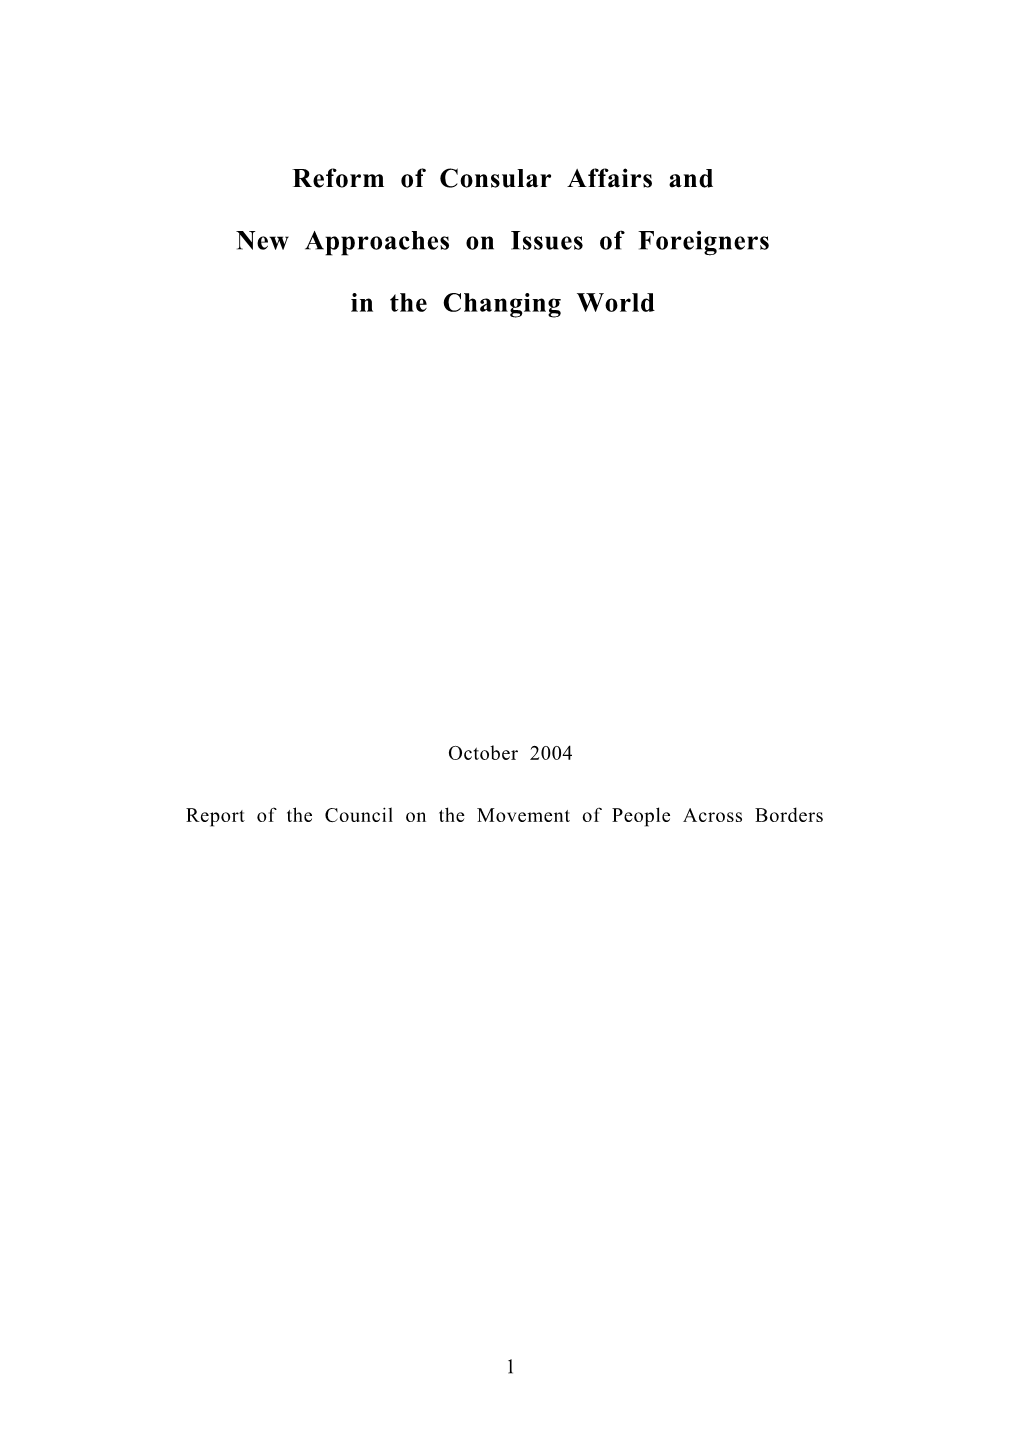 Reform of Consular Affairs and New Approaches on Issues Of